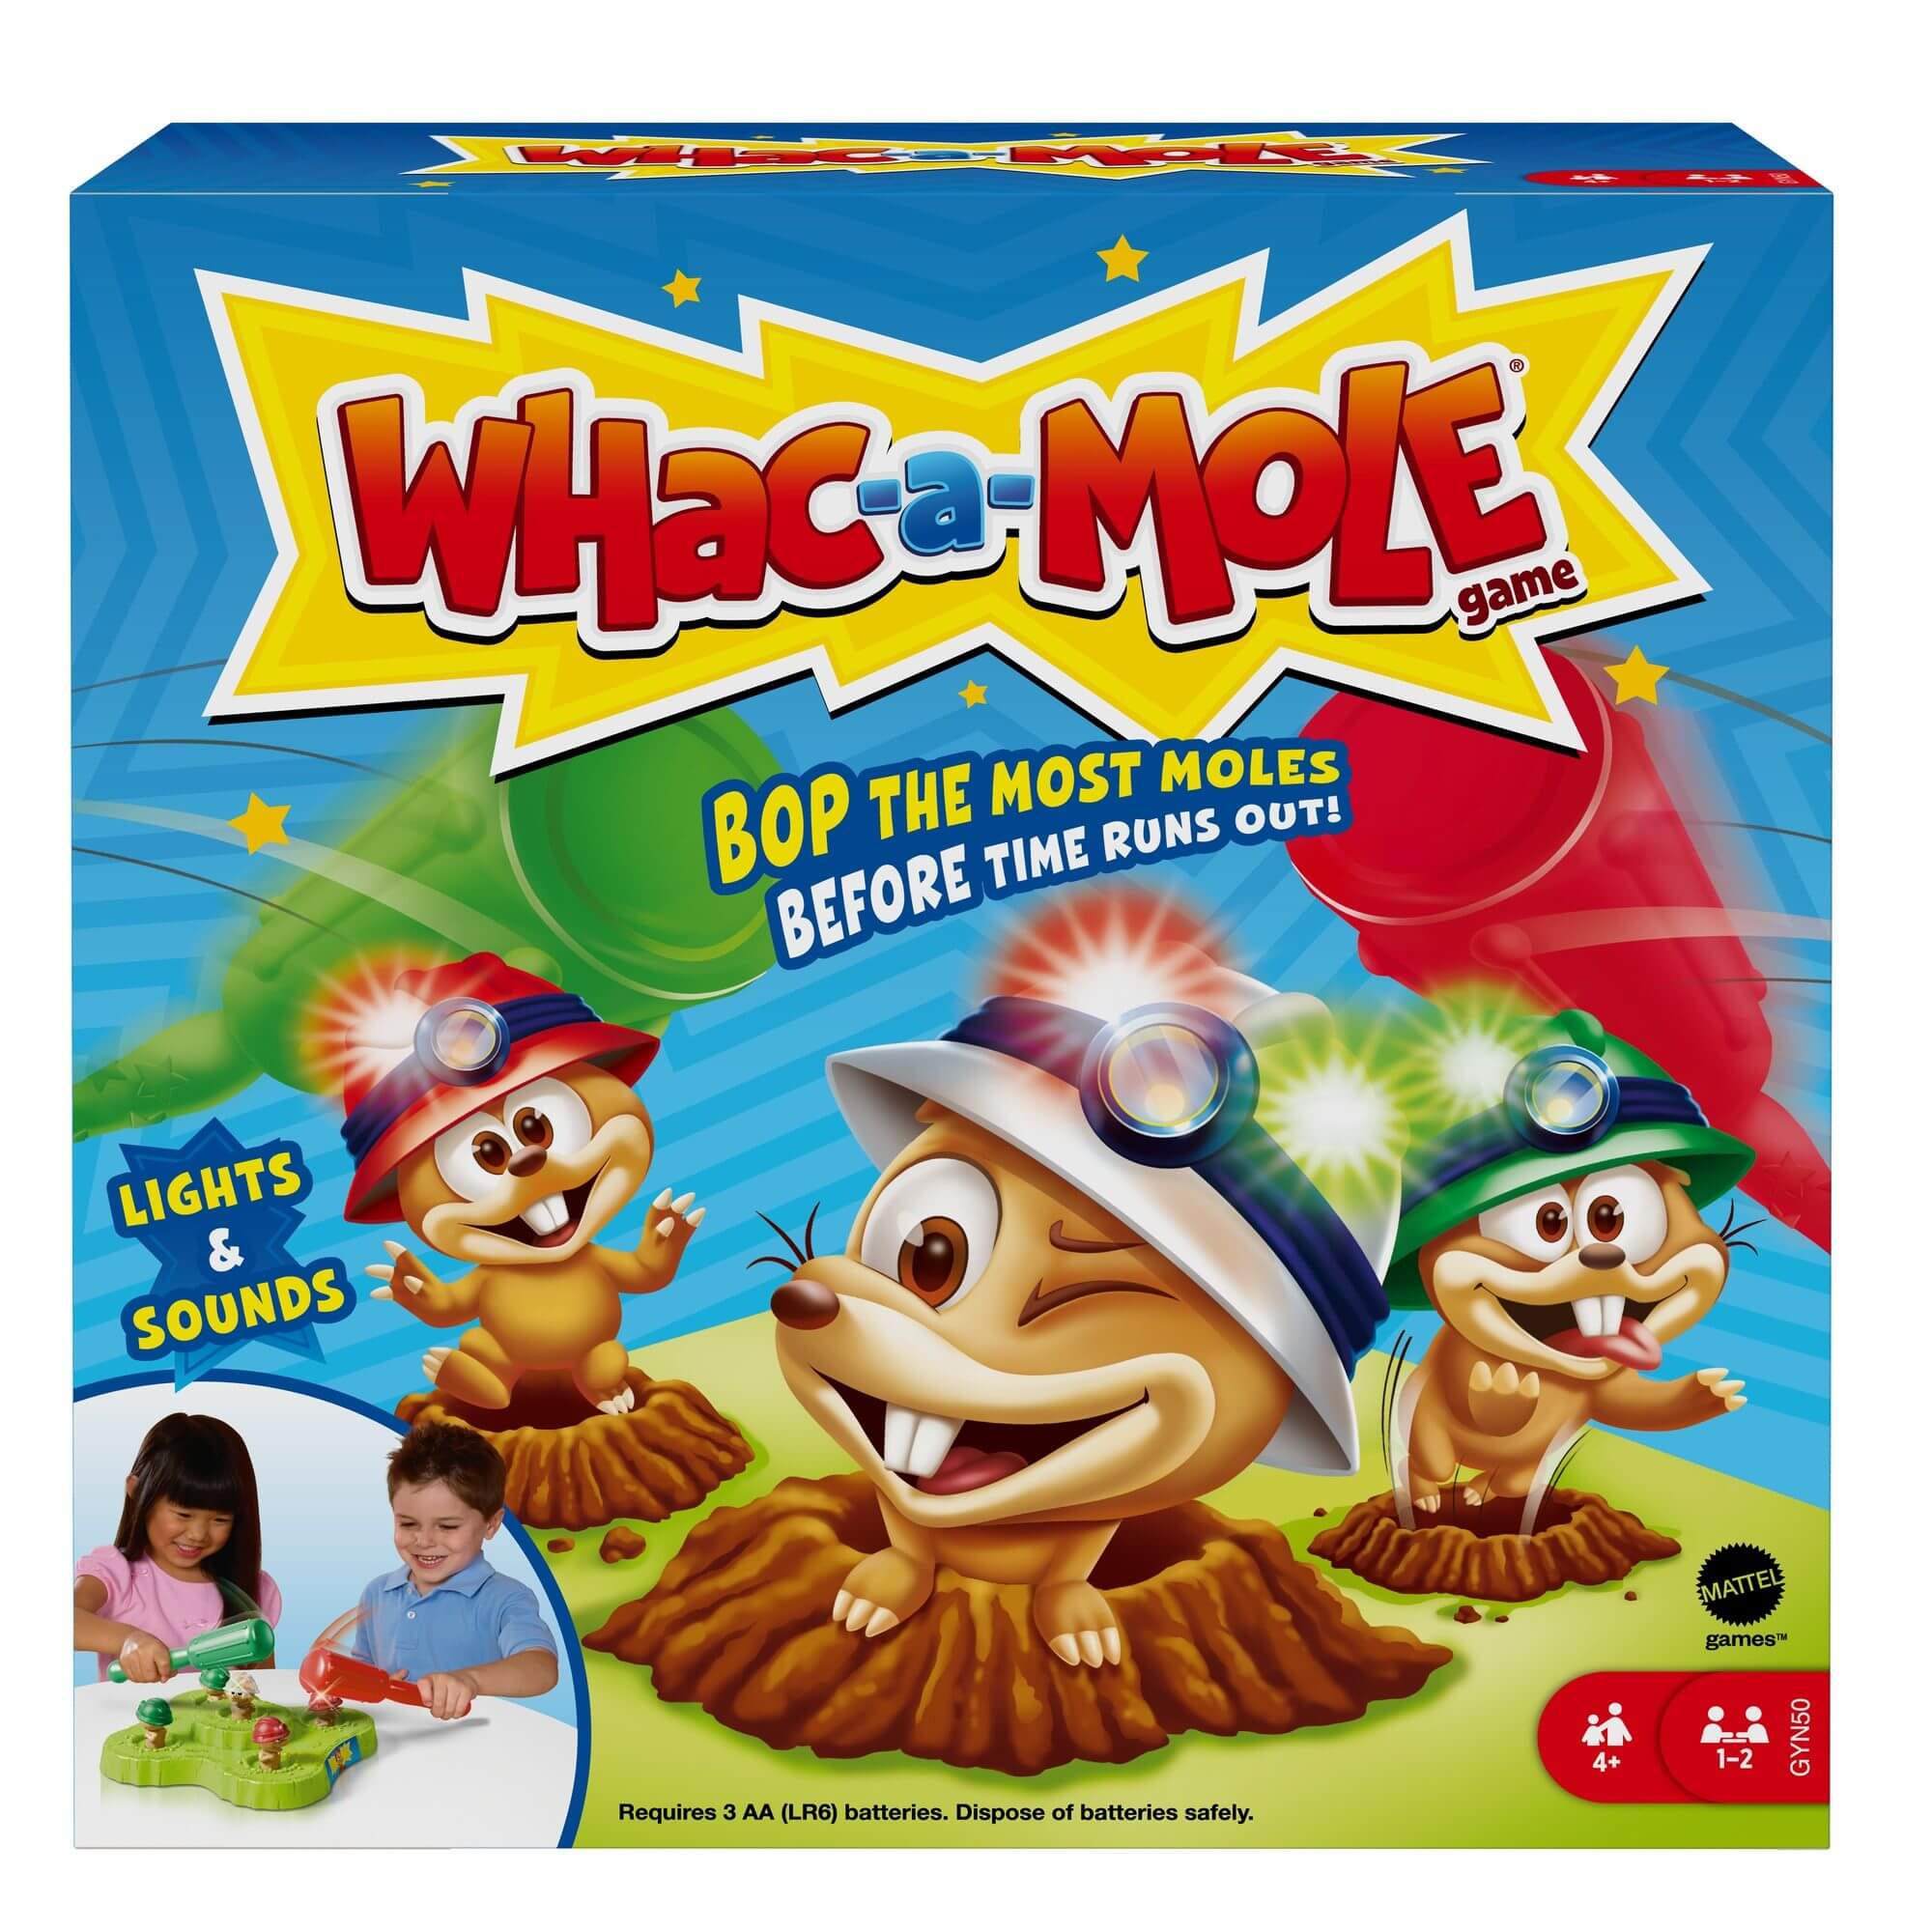 whac-a-mole  from mattel games - develop hand eye coordination skills in children - shop mattel games at The Toy Room